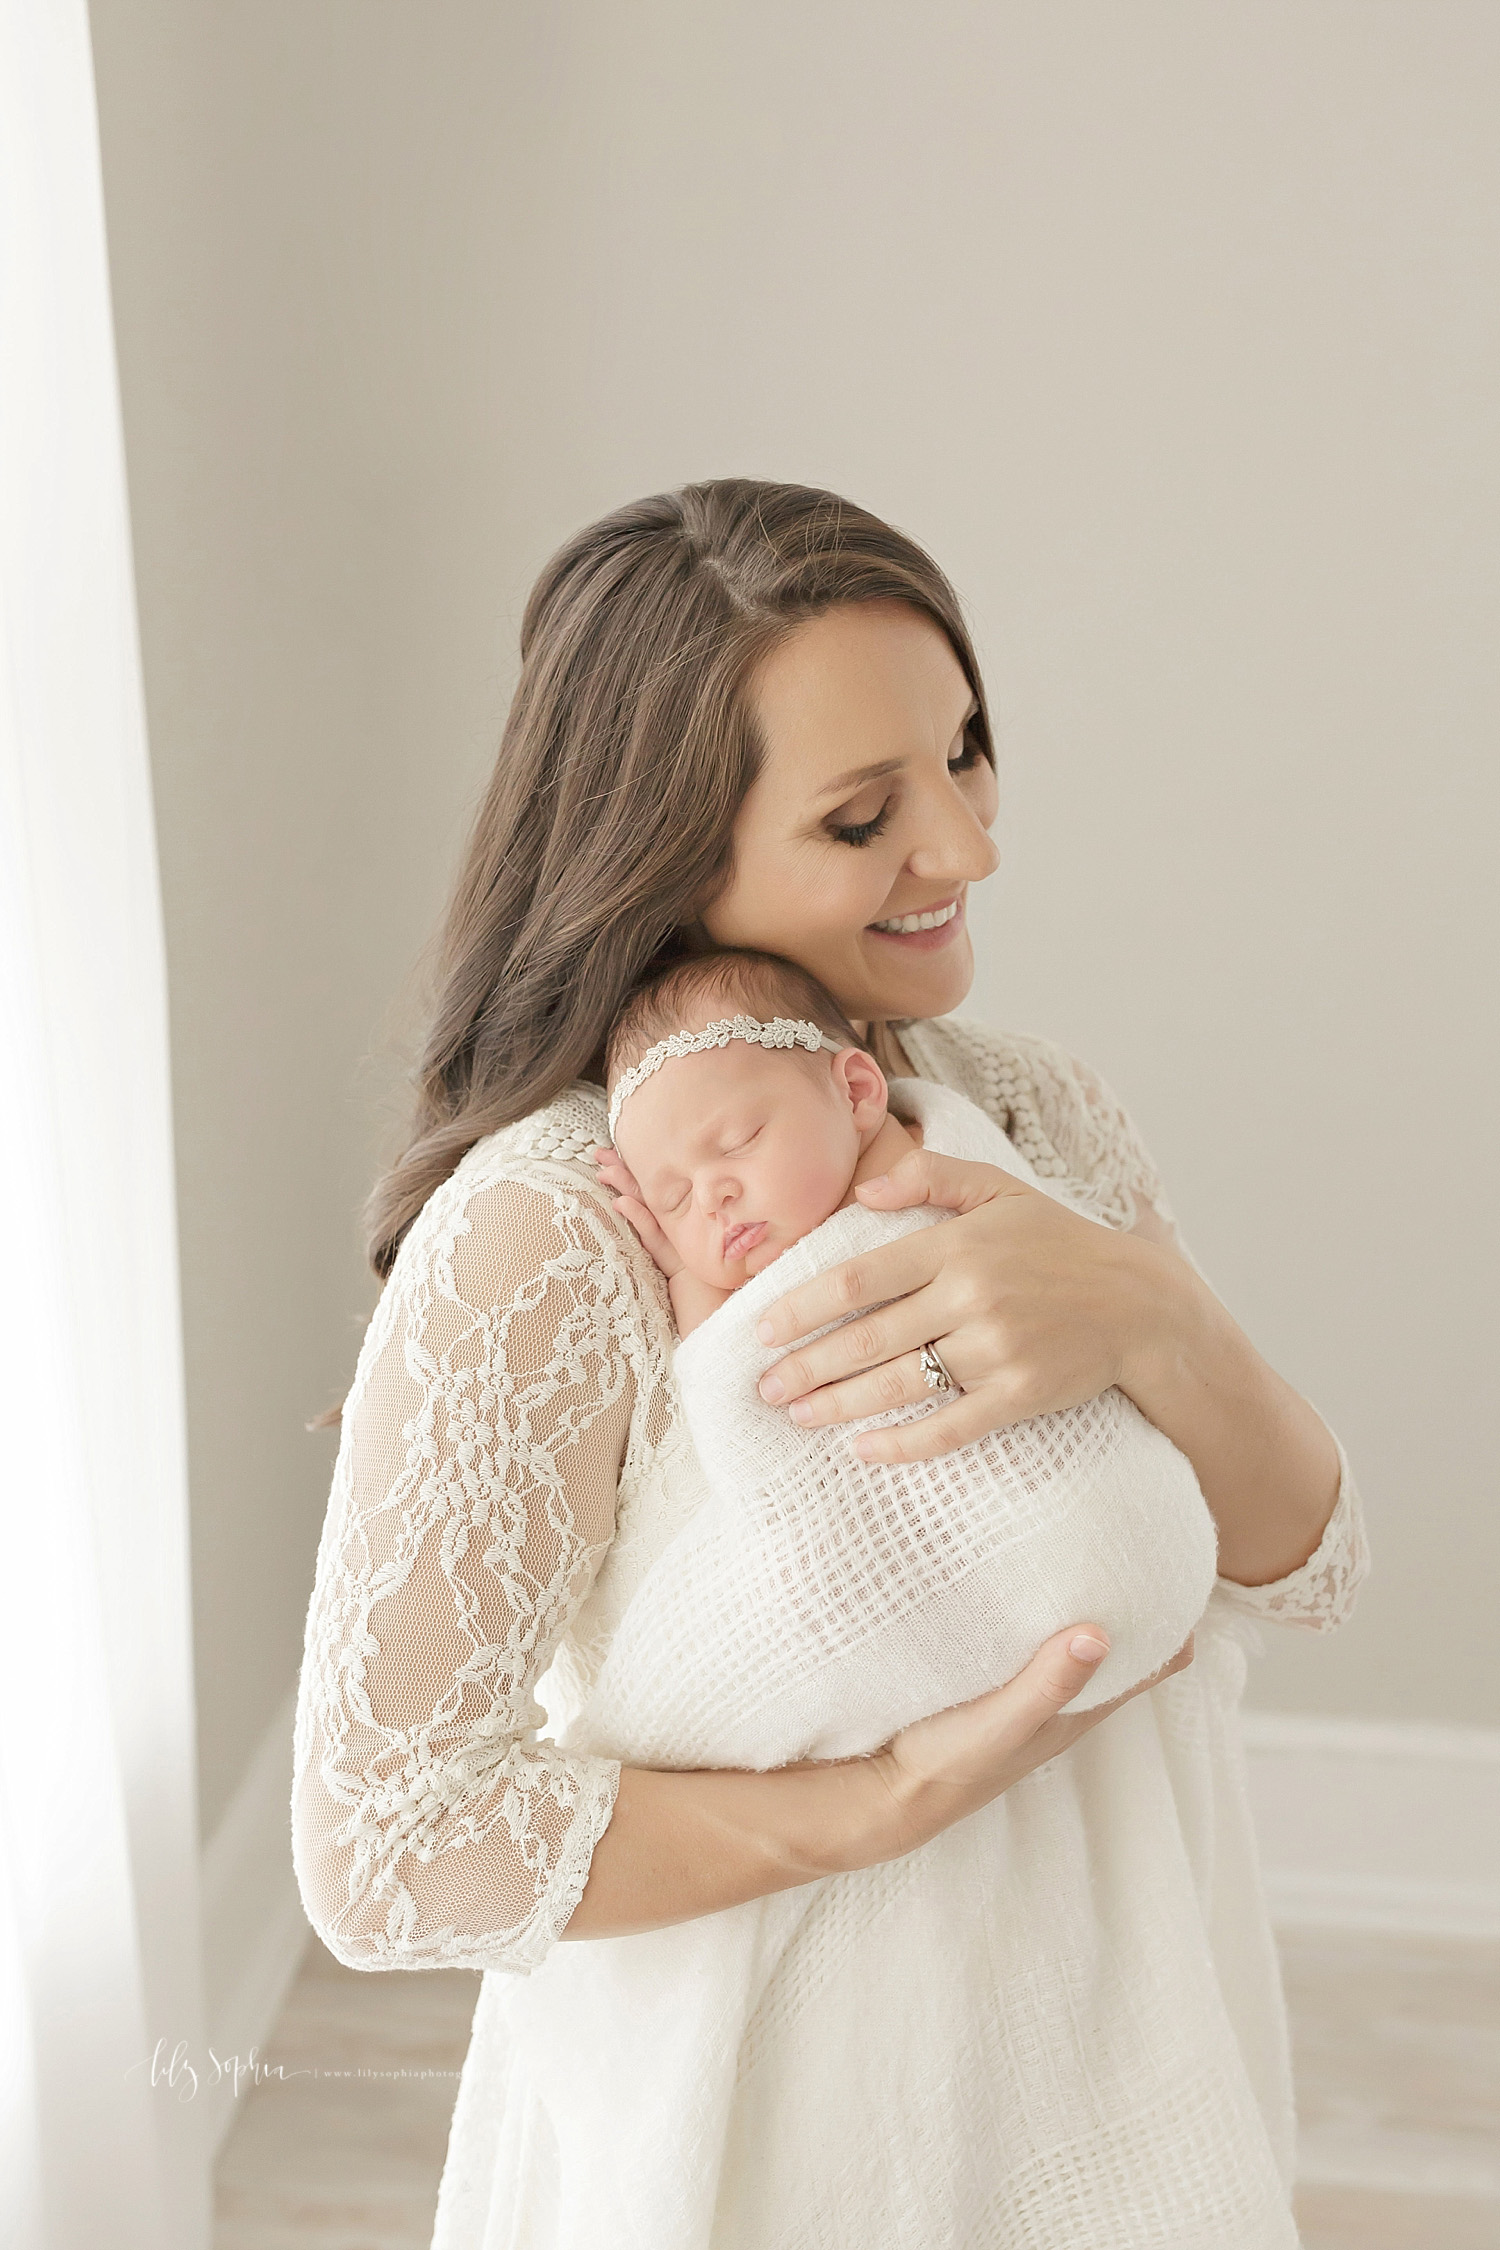  Image of a mother, wearing a lace top dress, holding her sleeping, newborn, baby, daughter, on her shoulder and smiling.&nbsp; 